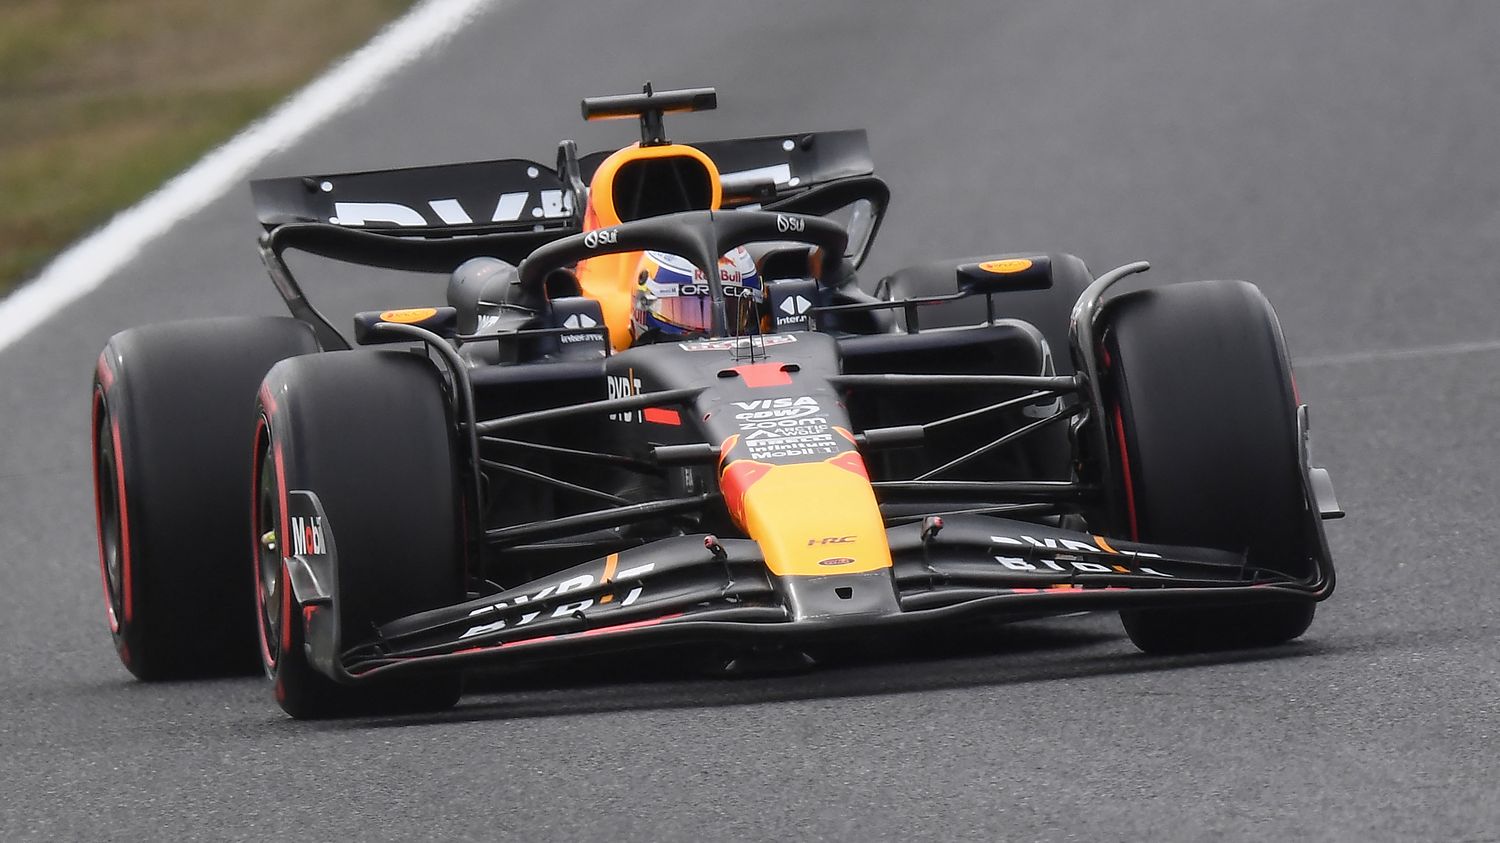 F1: Max Verstappen on pole position for the Japanese Grand Prix, Charles Leclerc misses out